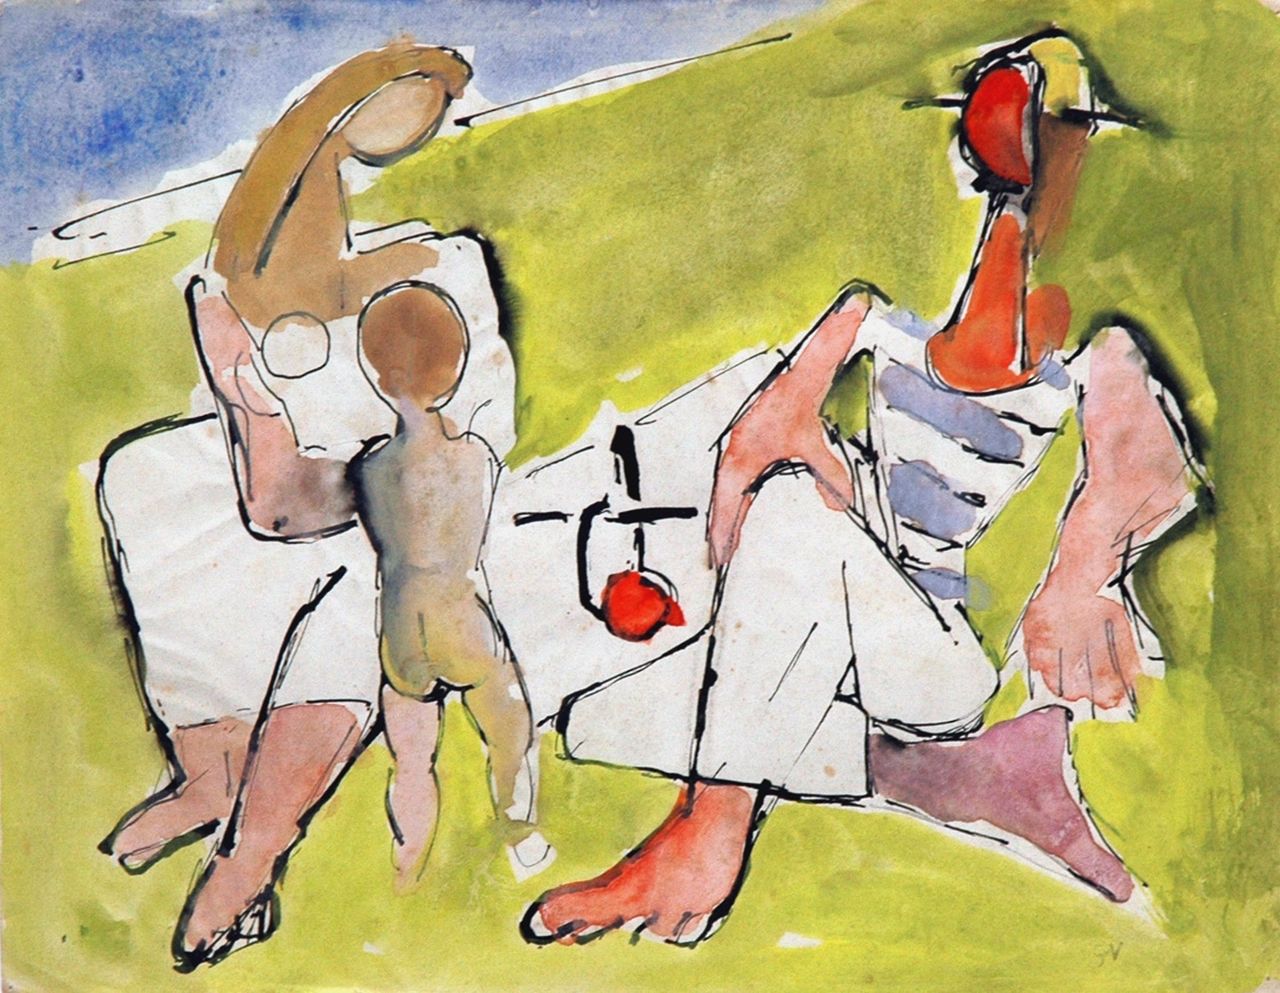 Velde G. van | Gerardus 'Geer' van Velde, A day at the beach, Indian ink and watercolour on paper 20.7 x 26.8 cm, signed l.r. with initials and painted circa 1944-1945